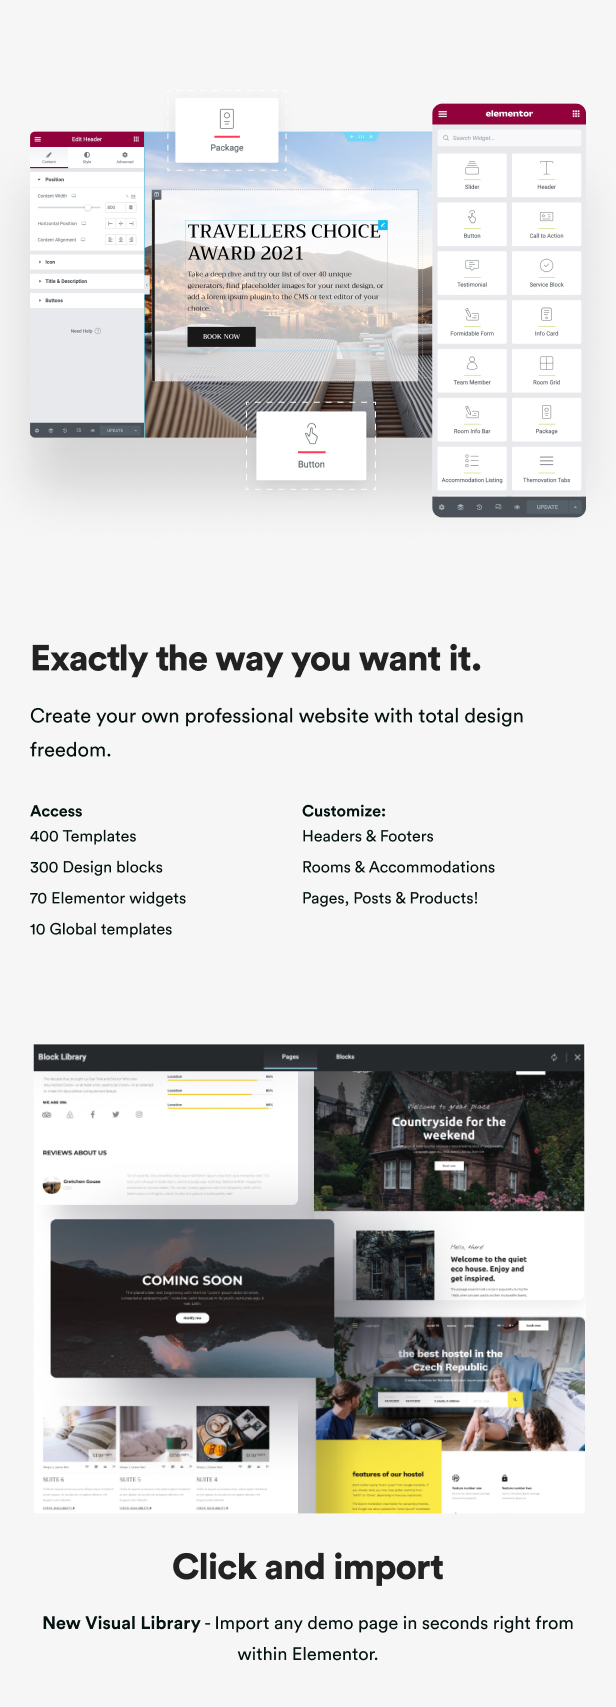 Create your own professional website with total design freedom.